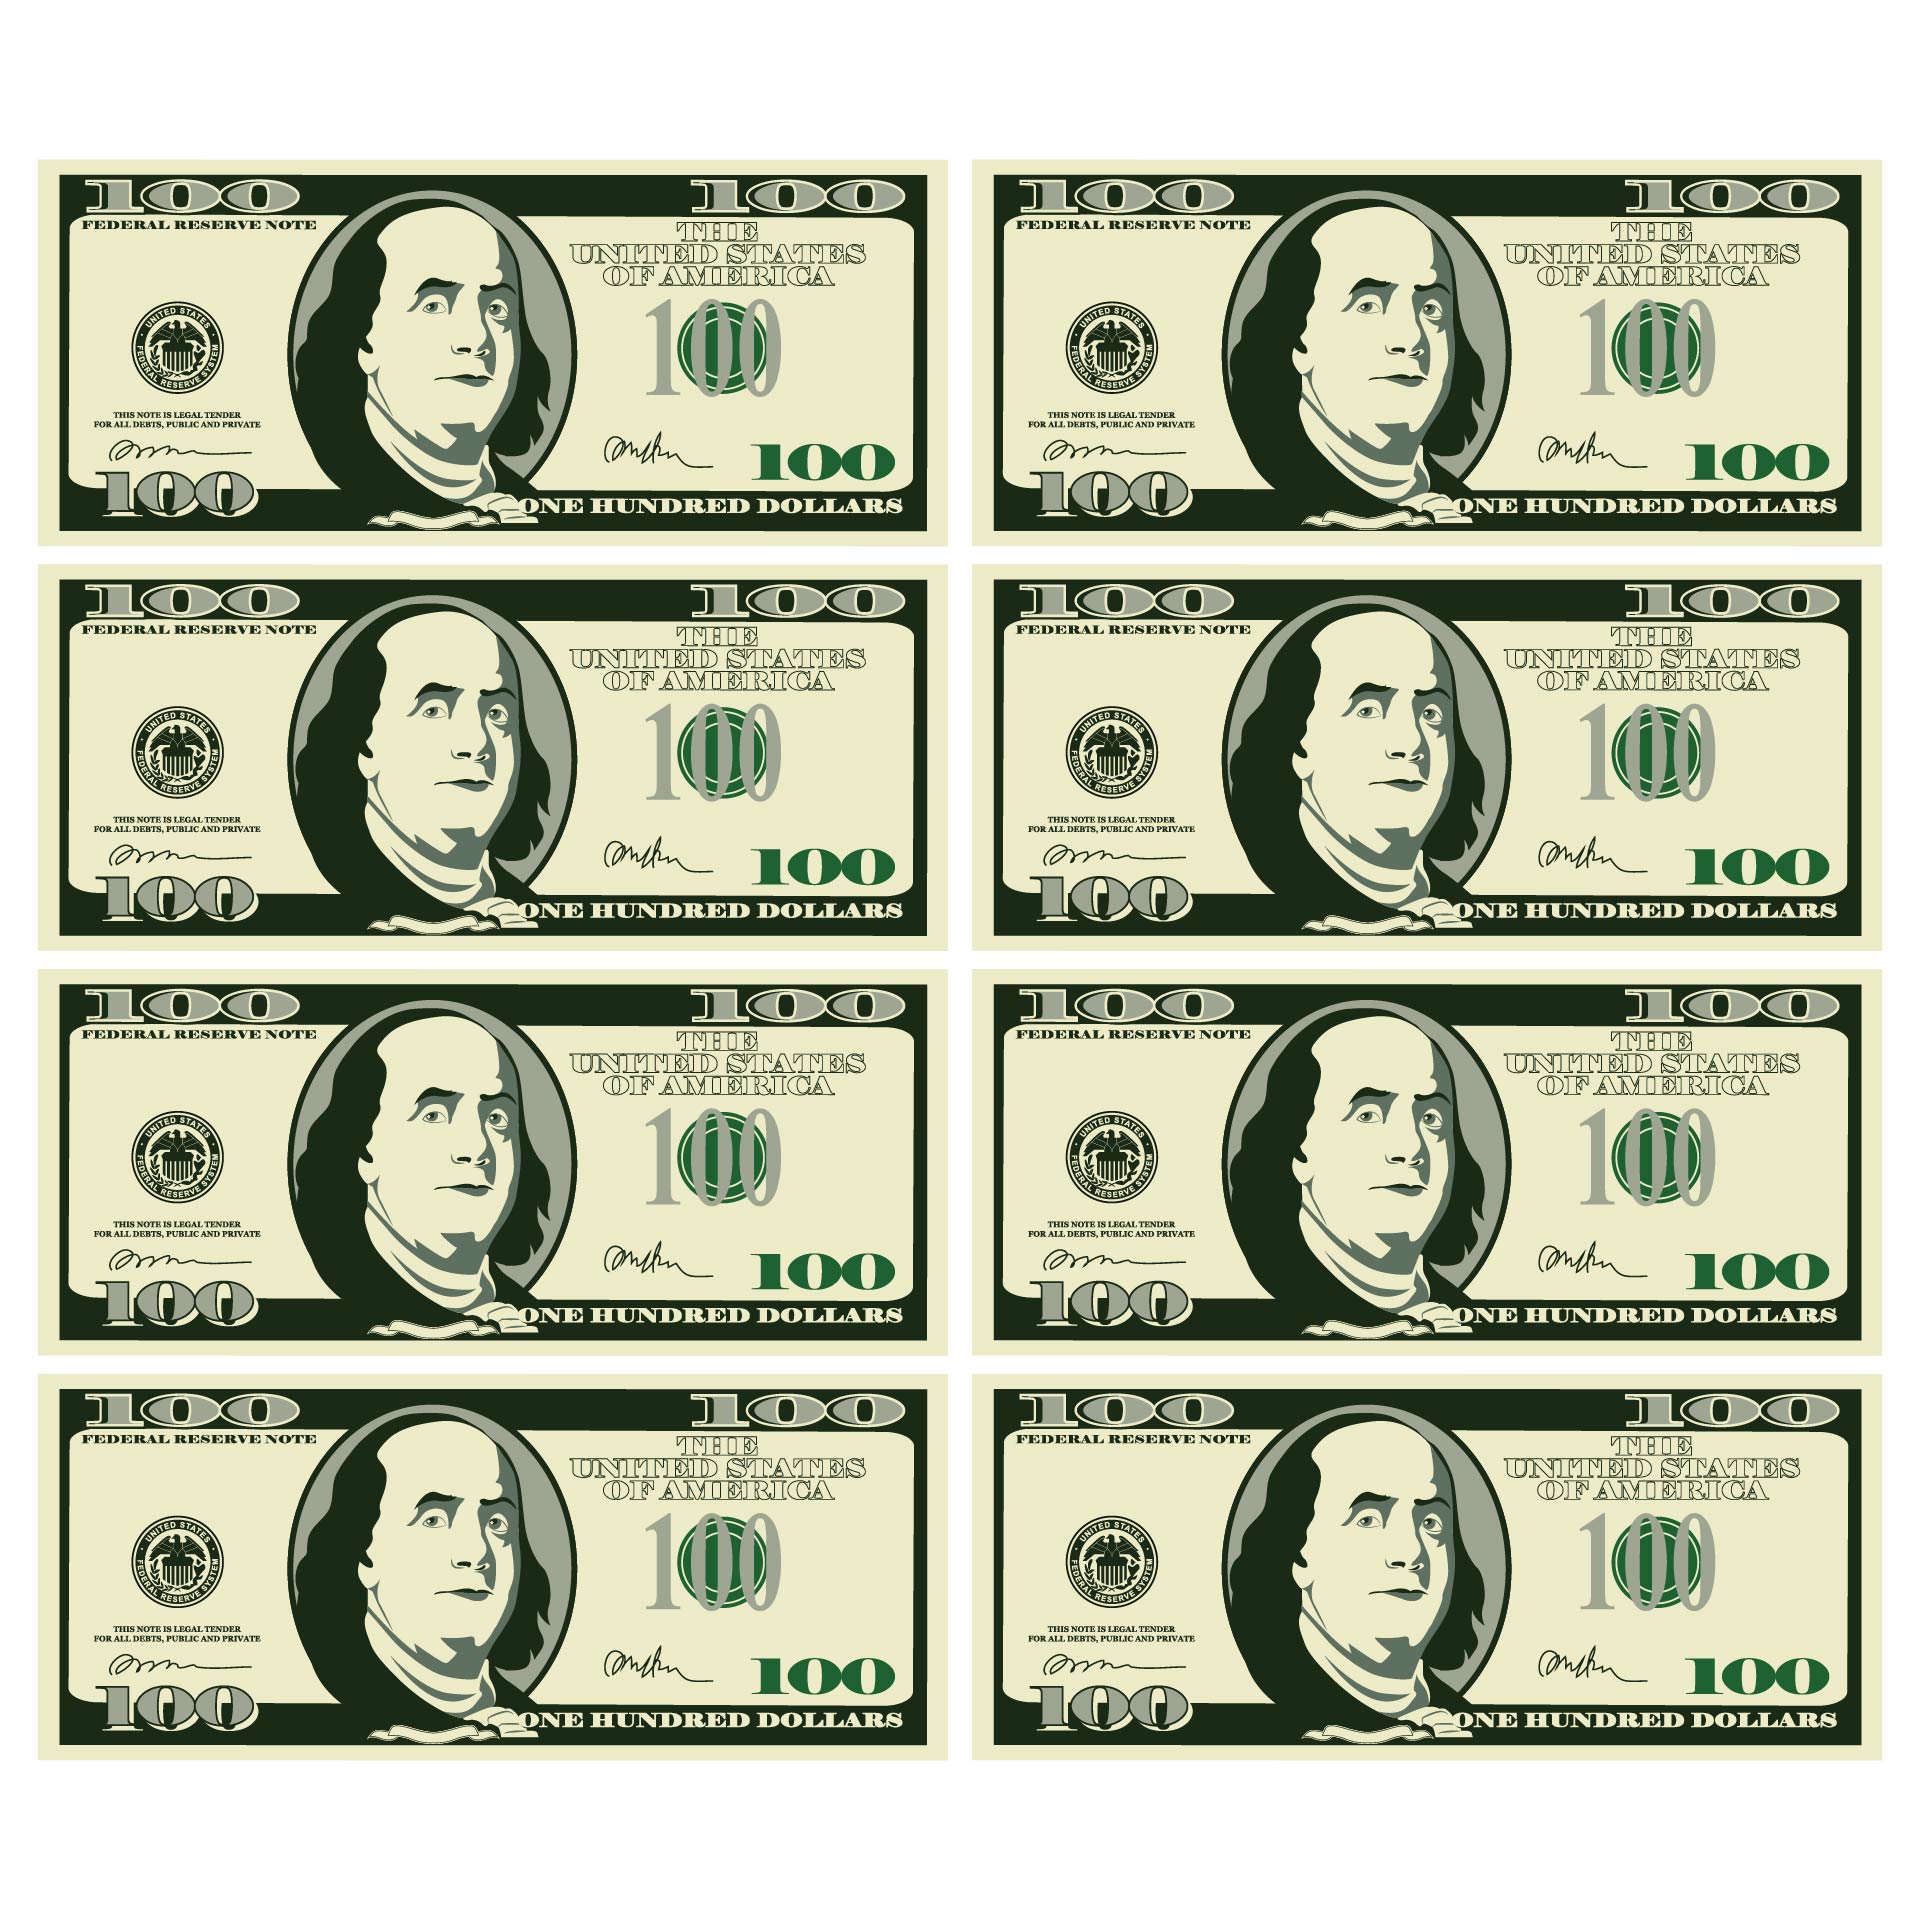 10 Best Printable Money That Looks Real